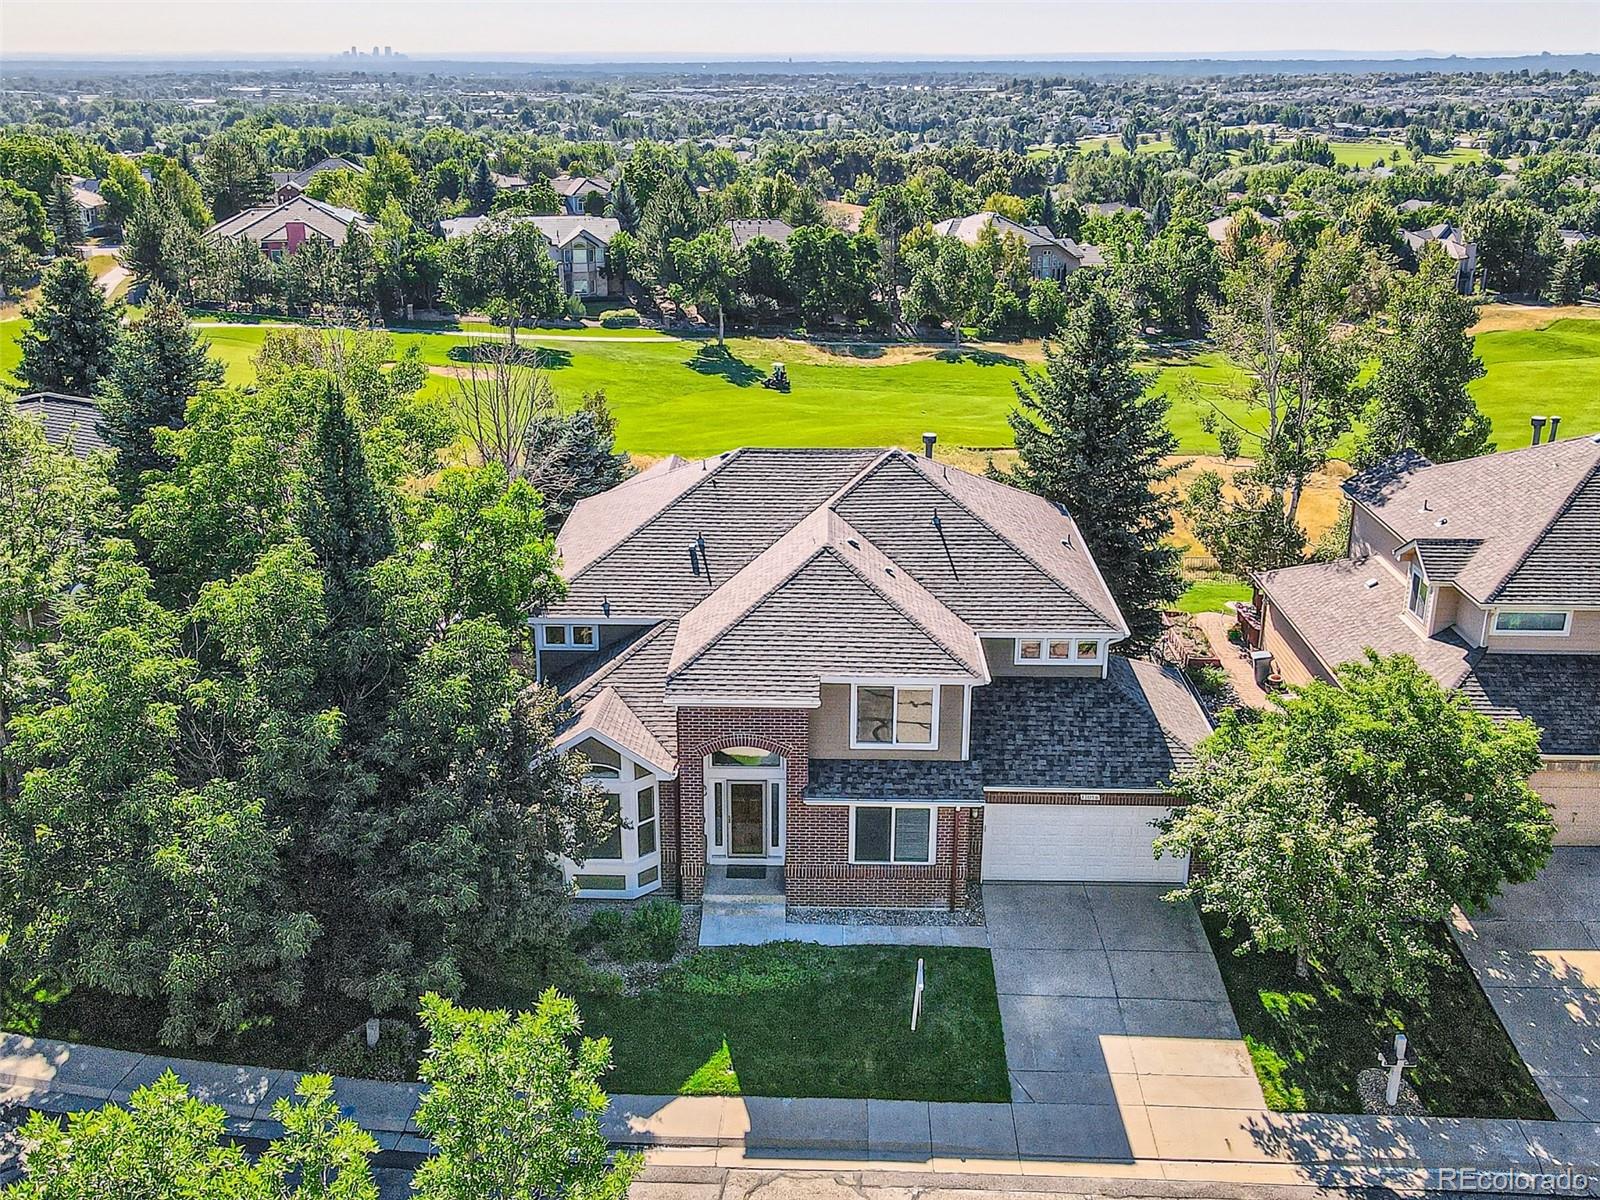 17056 W 71st Place, arvada MLS: 5305581 Beds: 4 Baths: 4 Price: $1,060,000